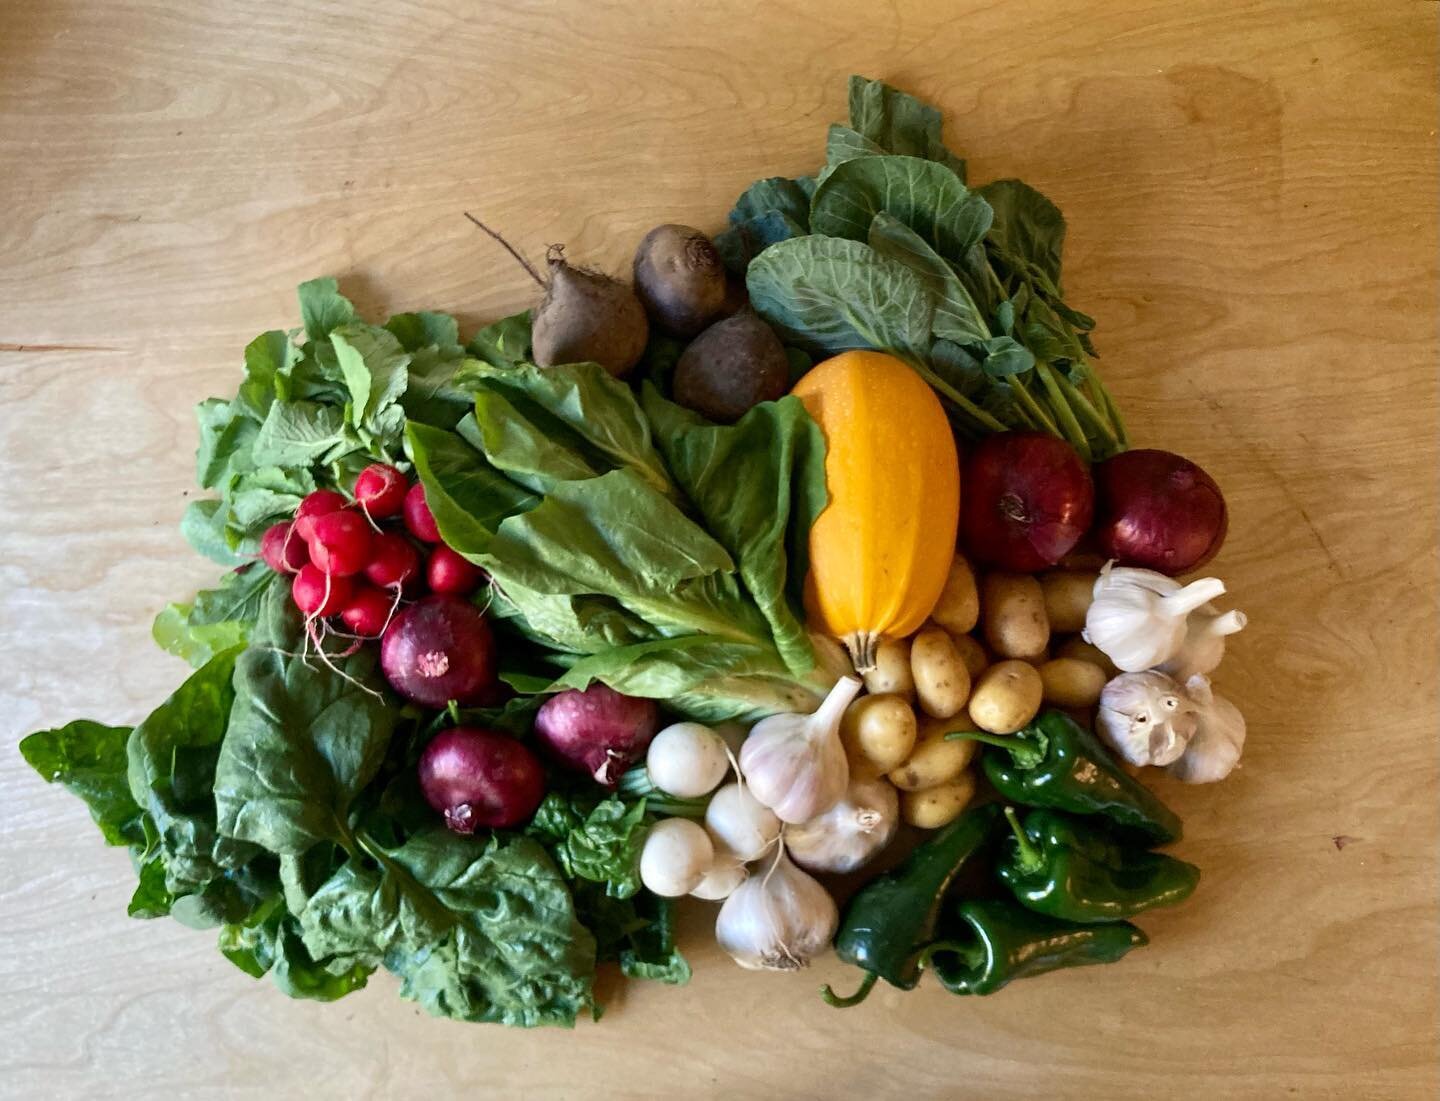 CSA from @glenvalleyorganicfarm : 
radishes, garlic, spinach, peppers, salad turnips, red onions, winter squash, brussels greens, and radicchio I thought was romaine. Bought in extra, beets, Glen Valley Red garlic, music garlic, cipollini onions, and